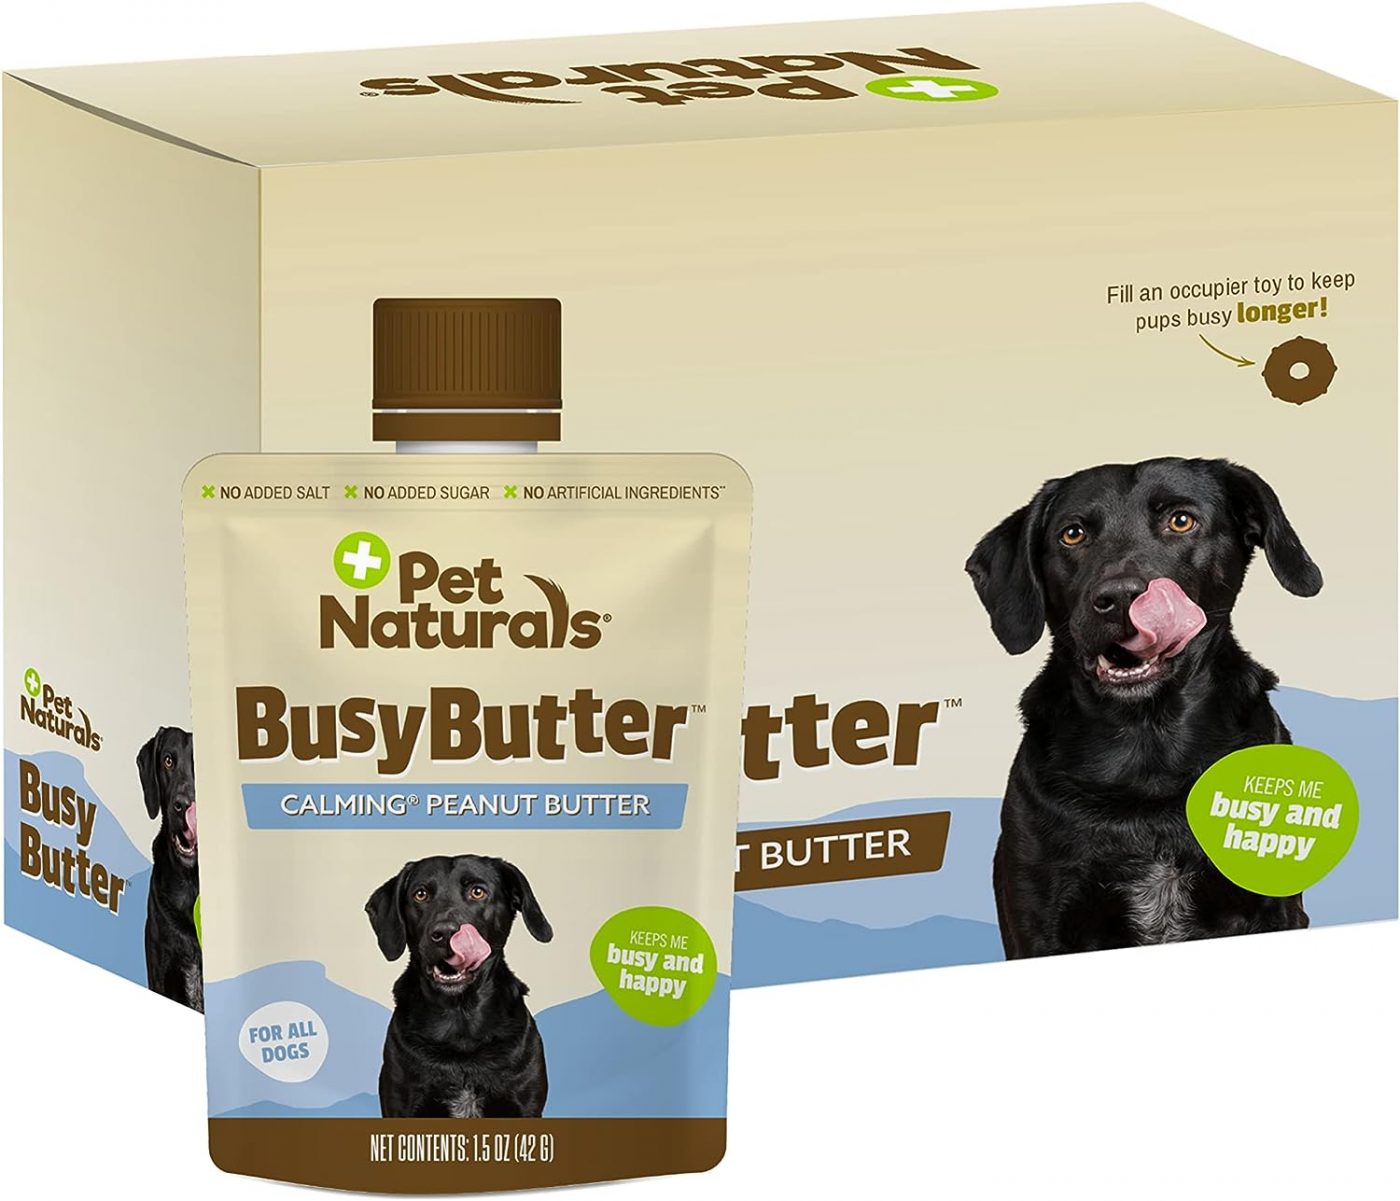 Busy Butter for Dogs: The Ultimate Energy Boost